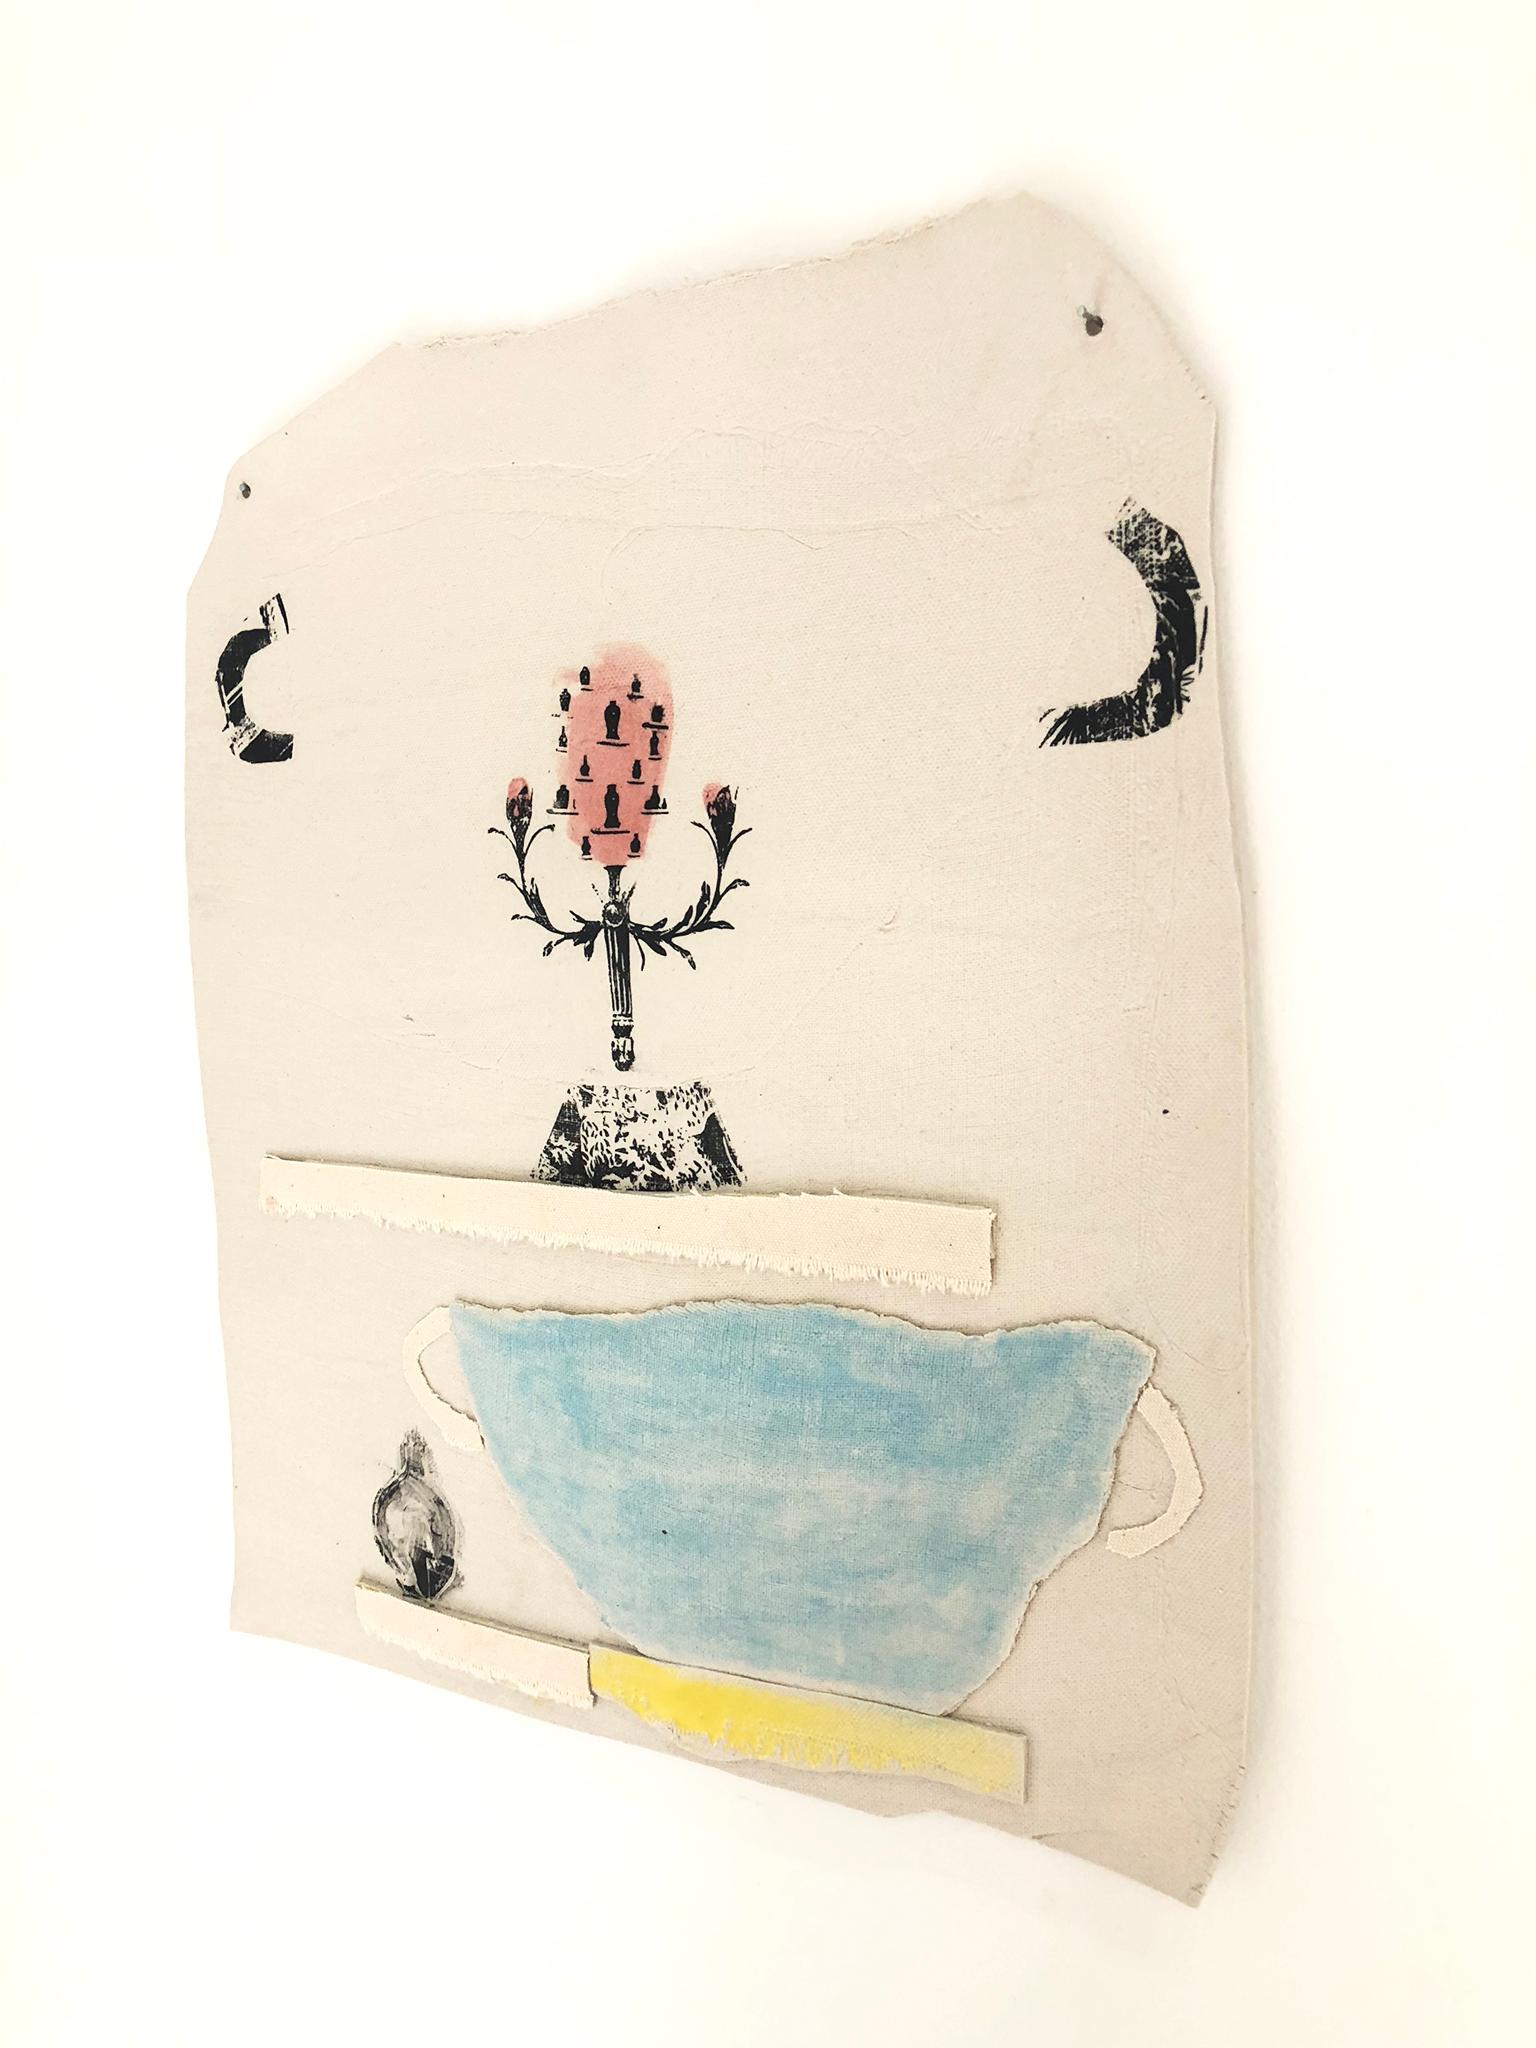 This ceramic and mixed-media vase collage by Alison Owen is a playful yet elegant wall piece made from thin slabs of white stoneware paper clay and mixed-media. The piece is layered with clay and canvas cut-outs, screen printed underglaze and